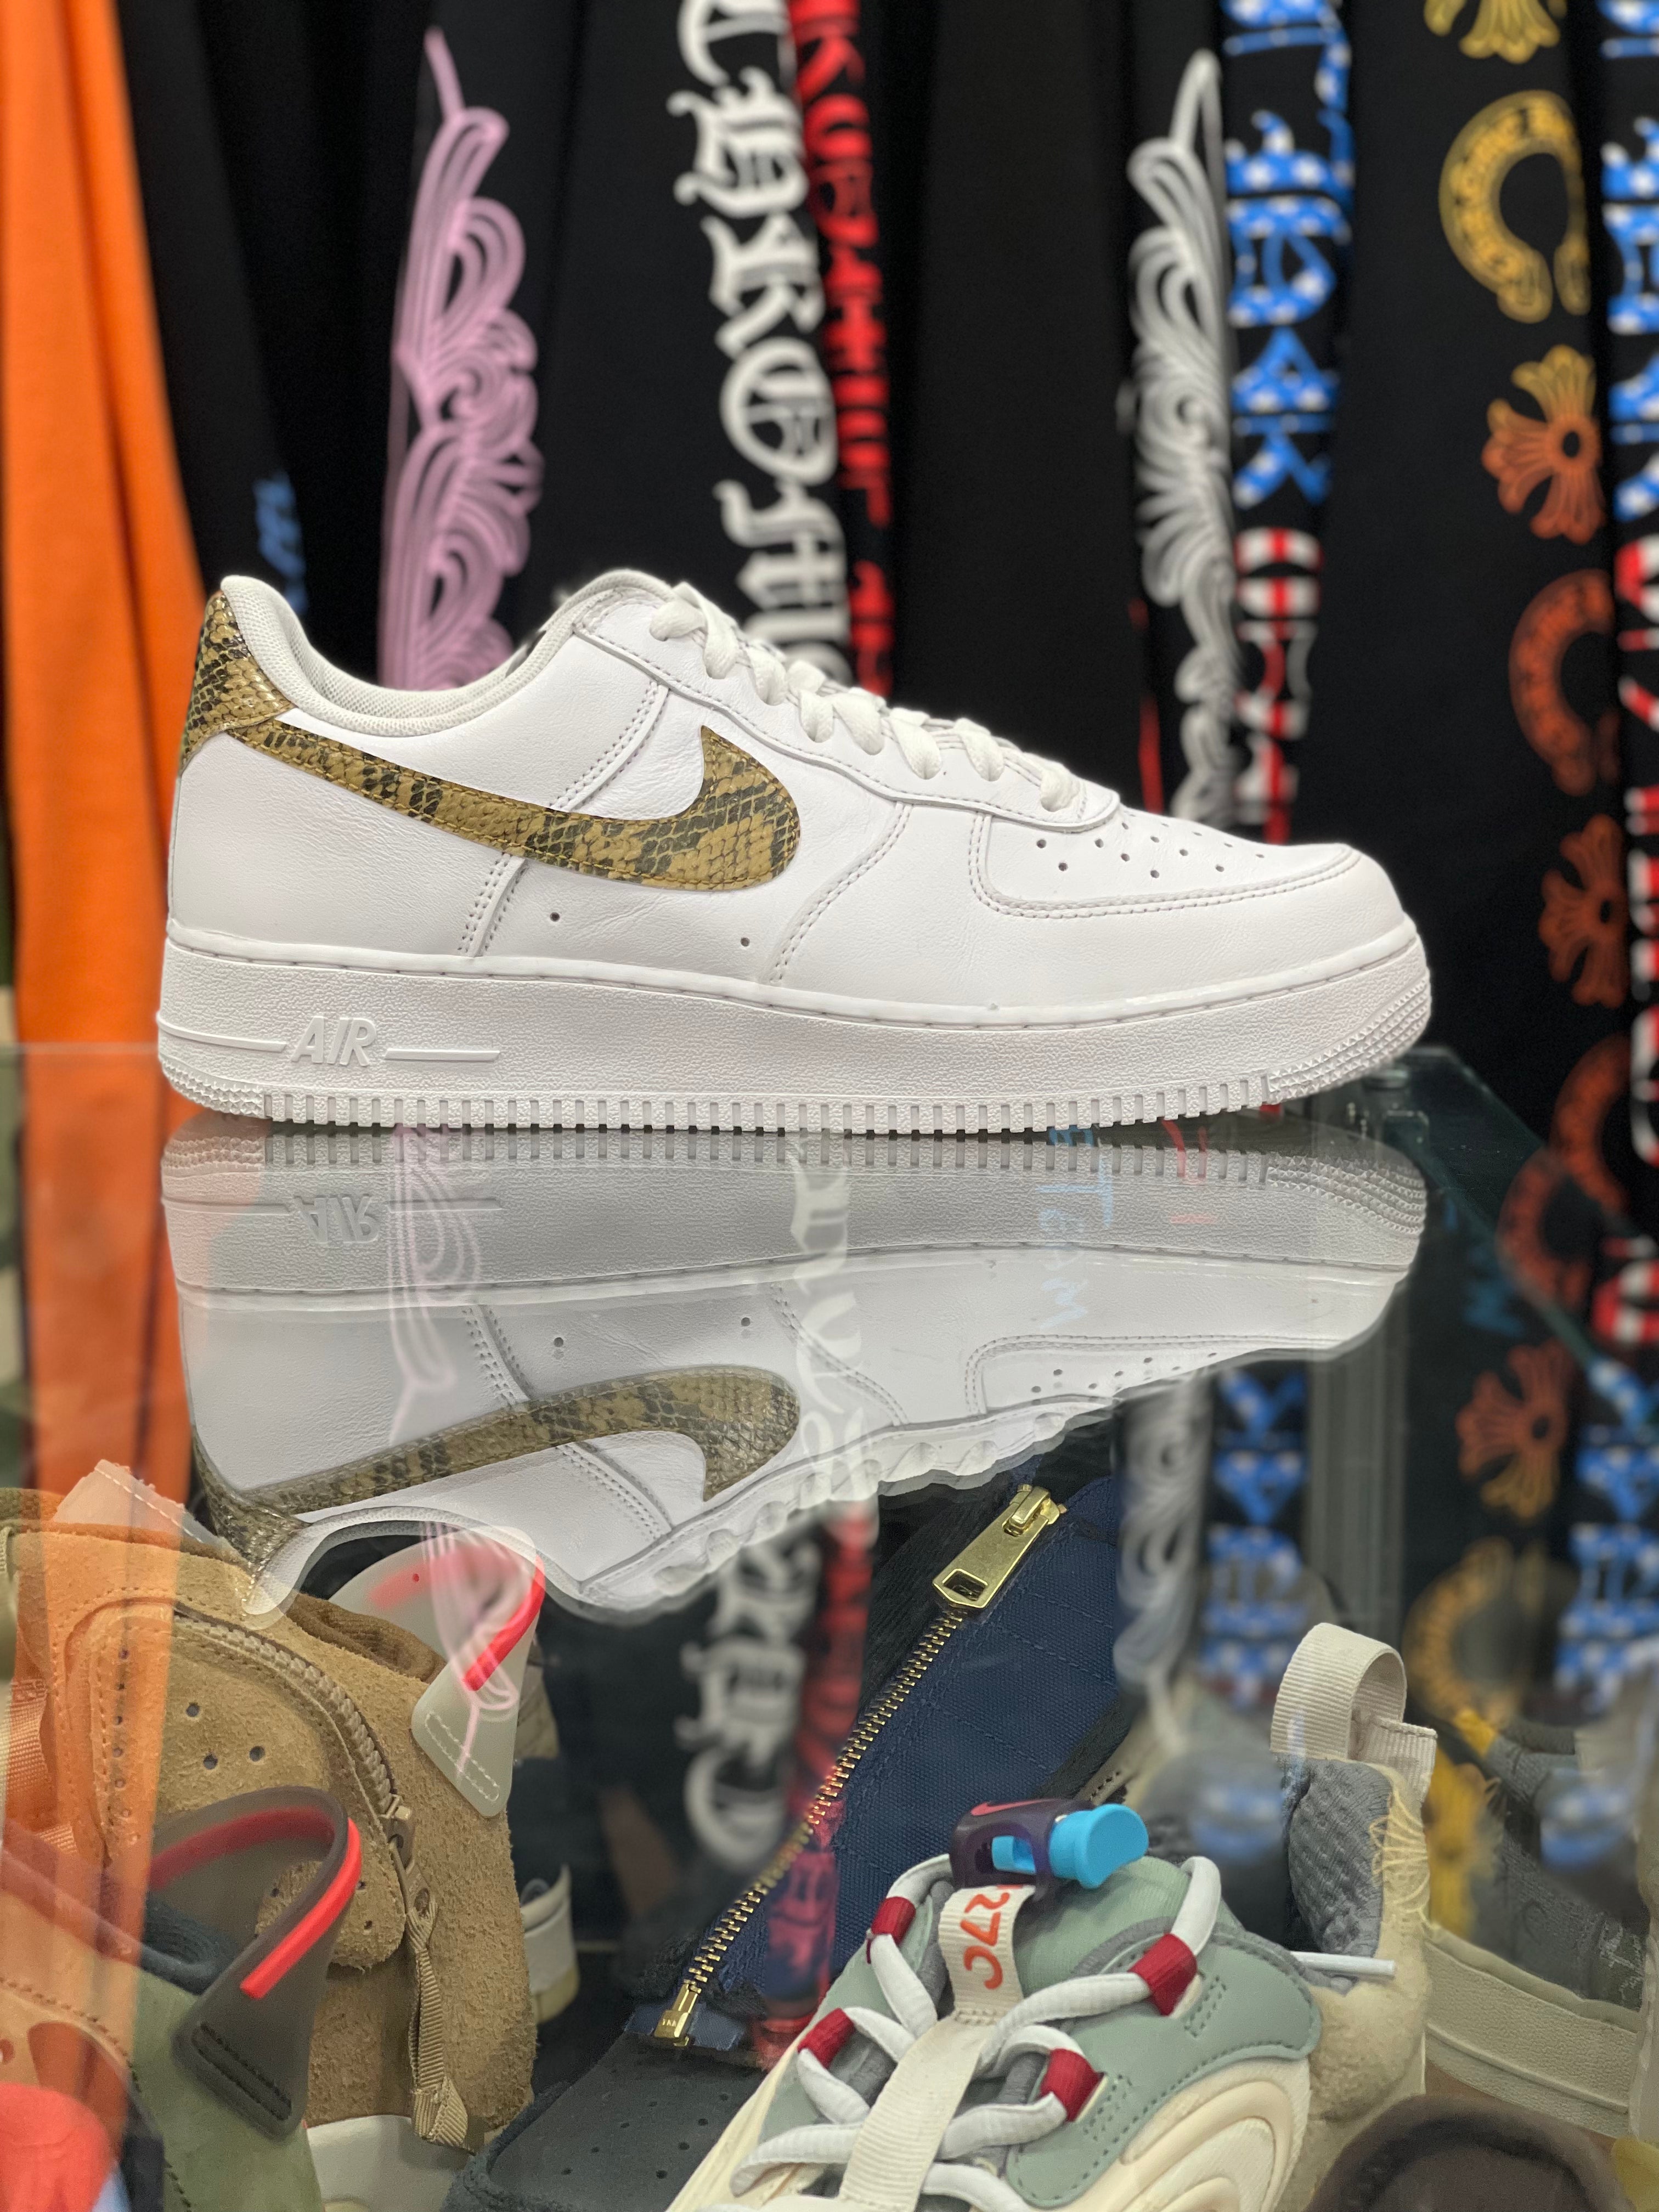 Nike Air Force 1 Low “Ivory Snake”